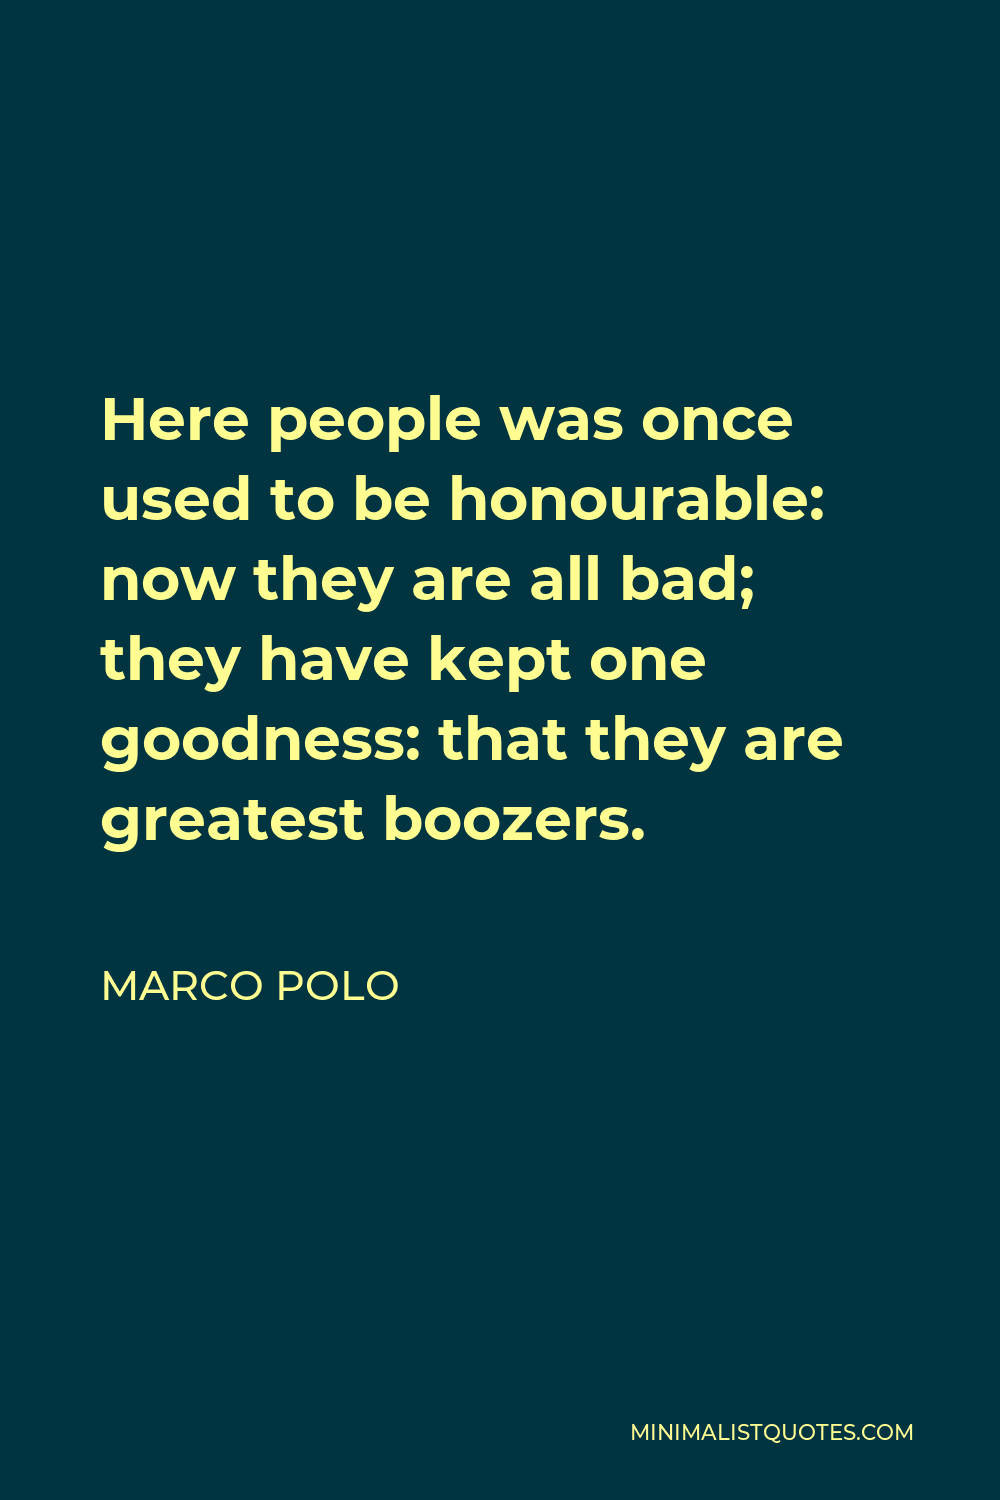 Marco Polo Quote - Here people was once used to be honourable: now they are all bad; they have kept one goodness: that they are greatest boozers.